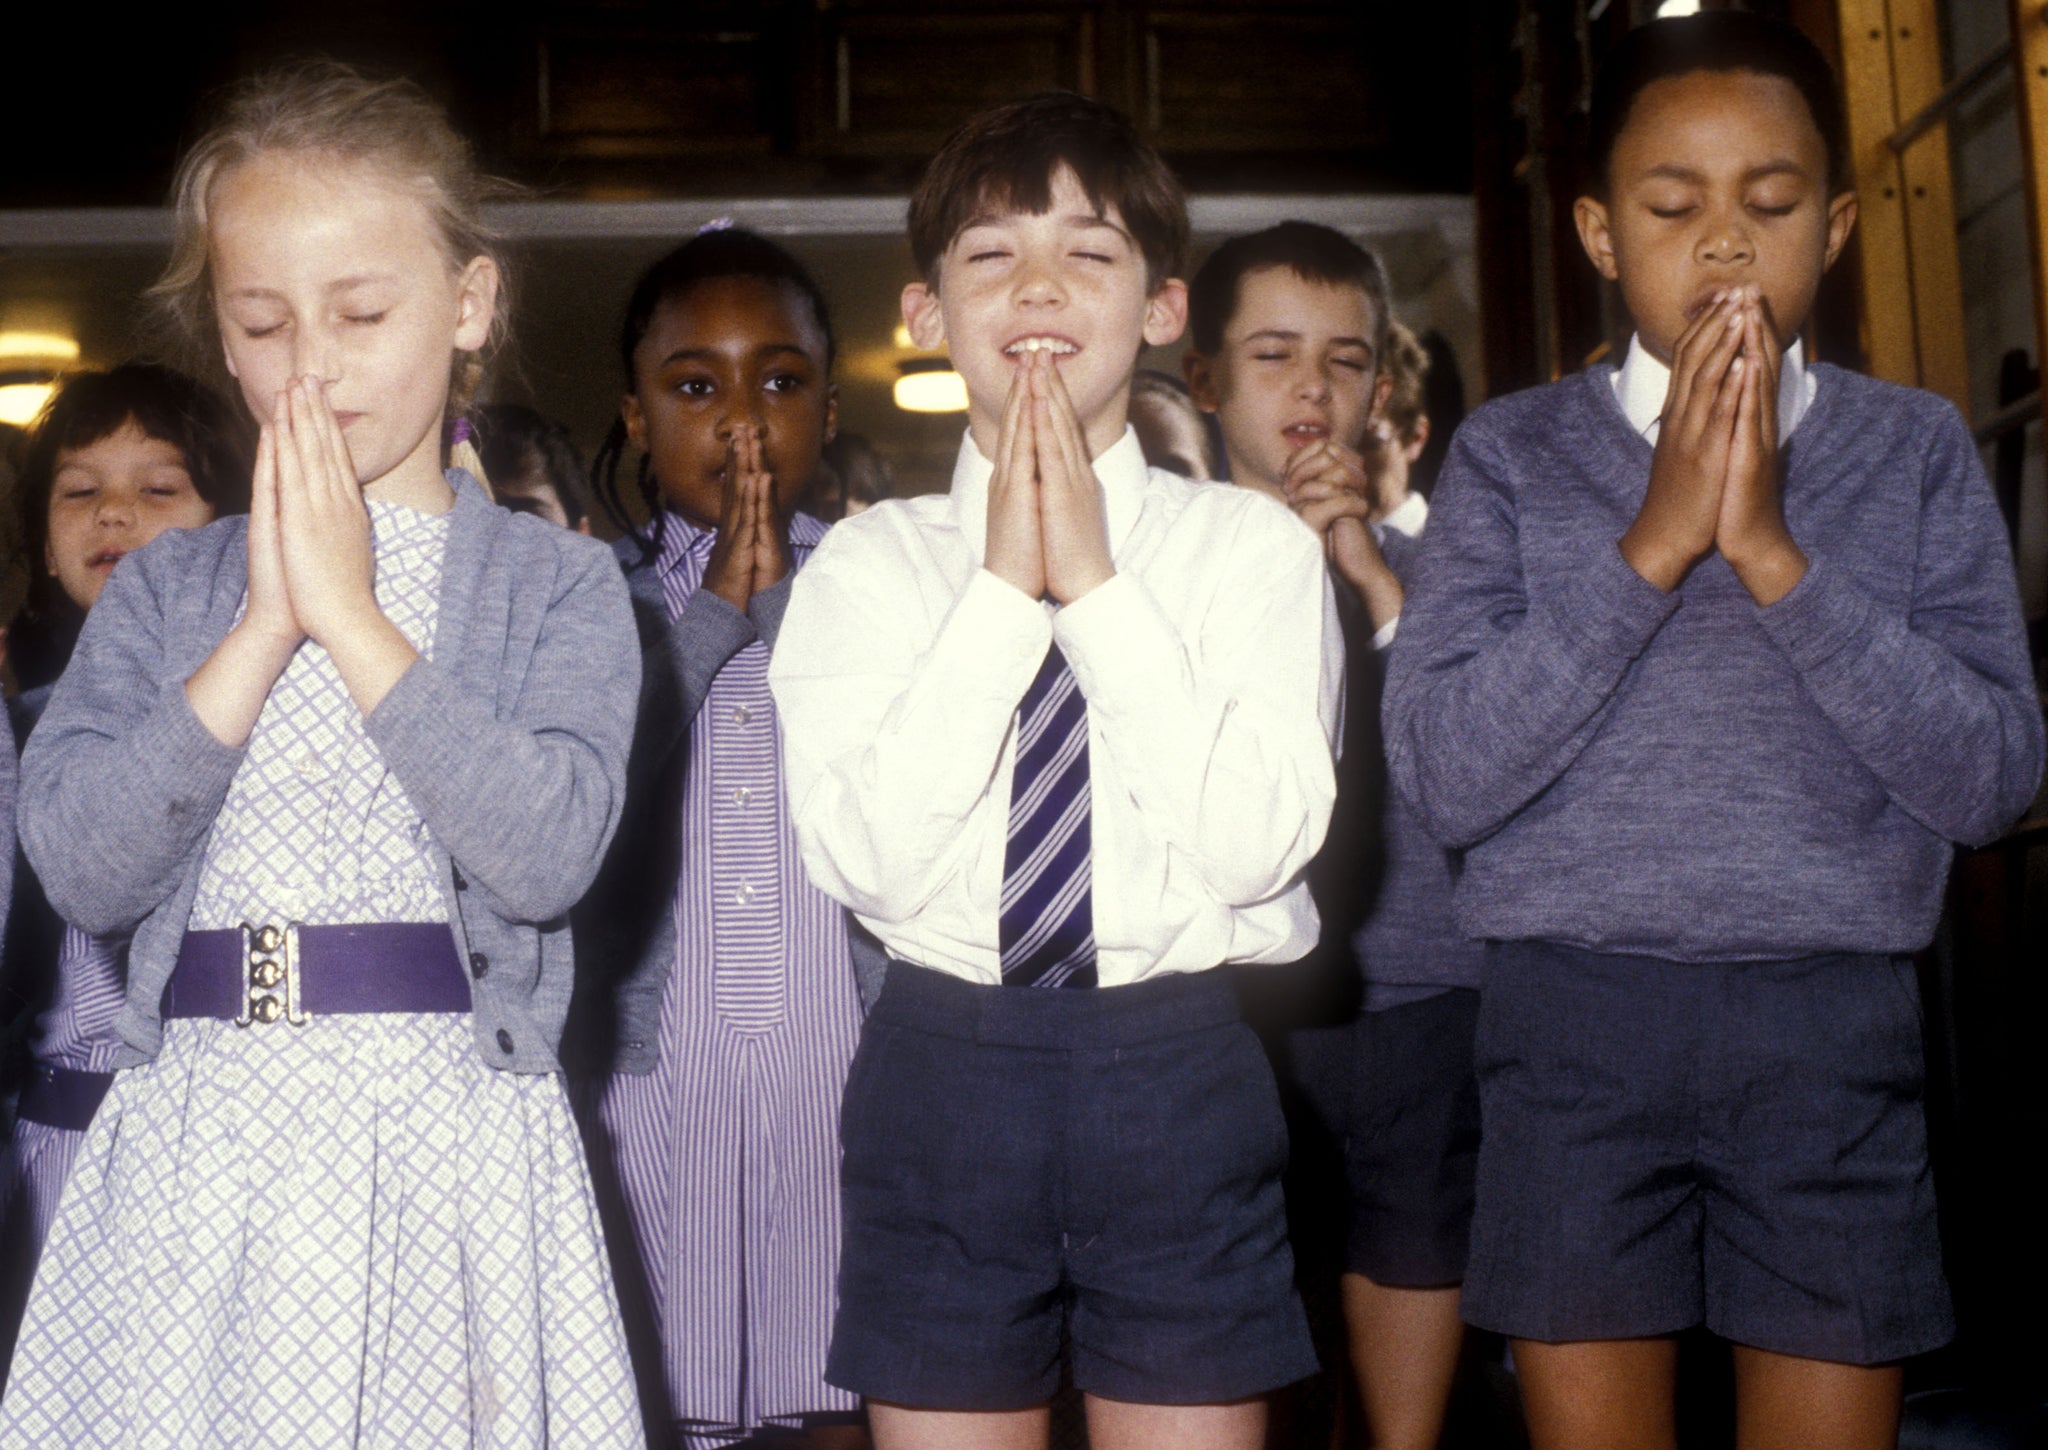 Children pray at a school in South London